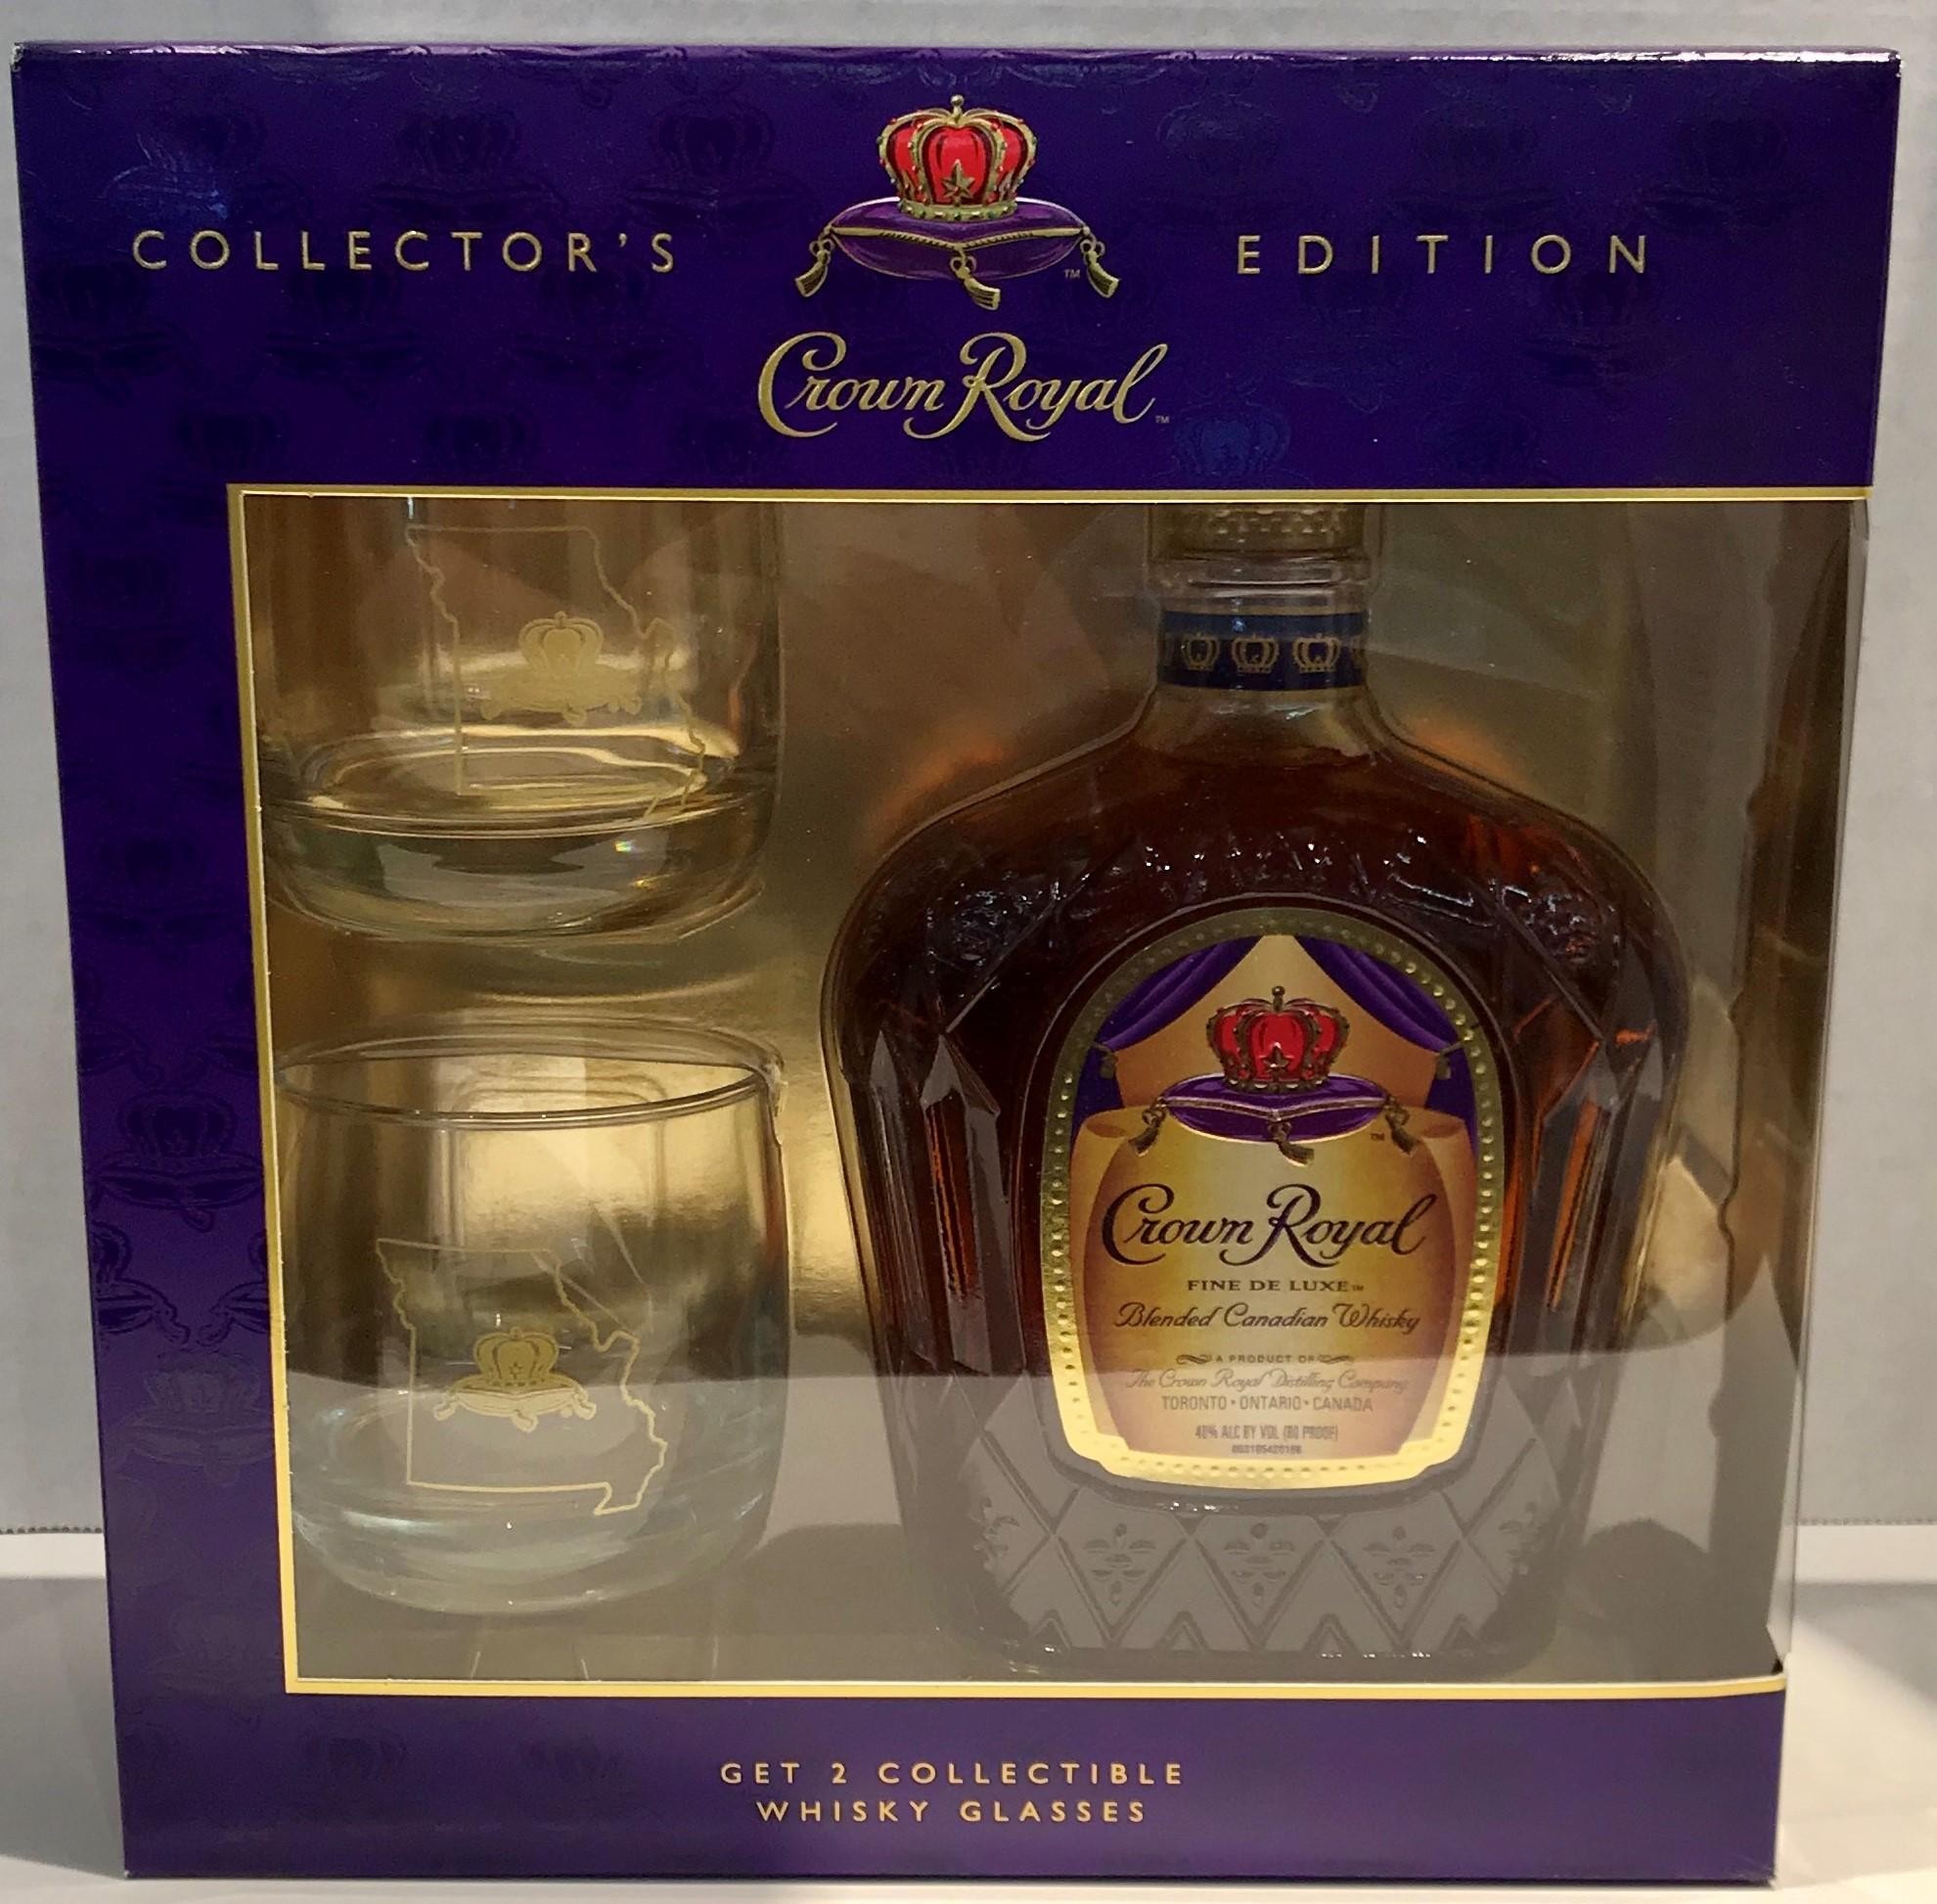 Crown Royal Fine De Luxe Blended Canadian Whisky with Two Signature Rocks Glasses - 750ml Bottle